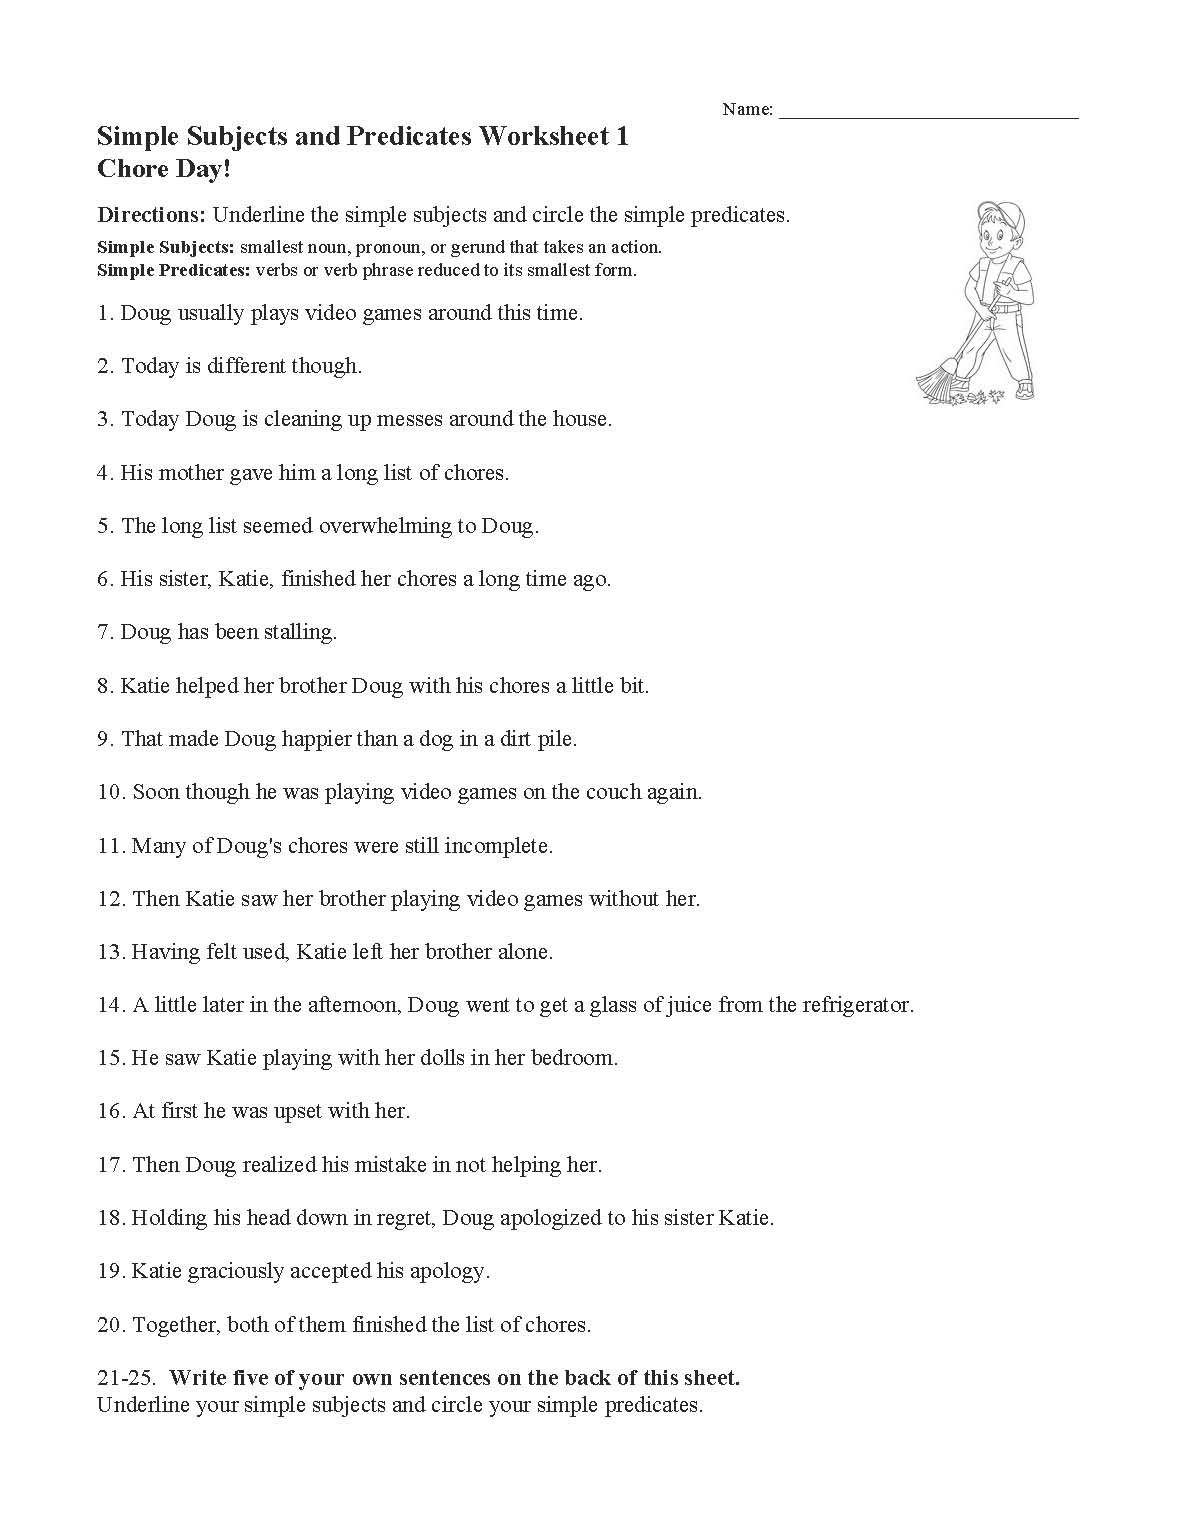 simple-subjects-and-predicates-worksheet-1-sentence-structure-activity